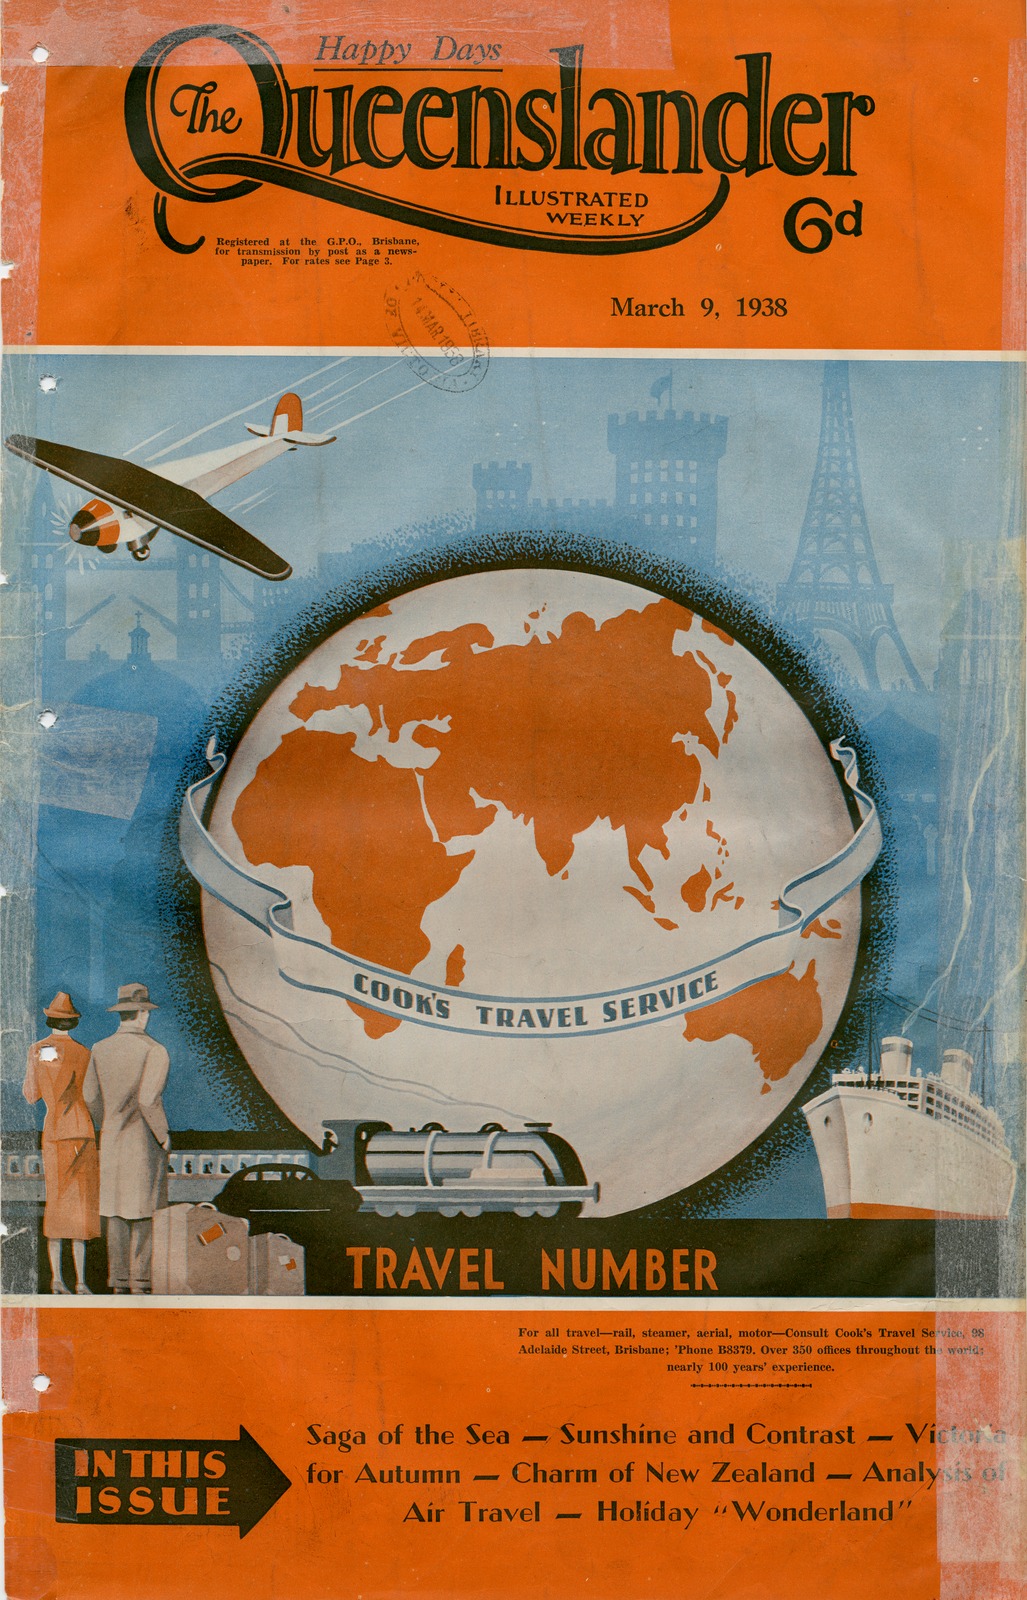 Illustrated front cover from The Queenslander, March 9, 1938 showing a couple looking at a large globe and the southern hemisphere